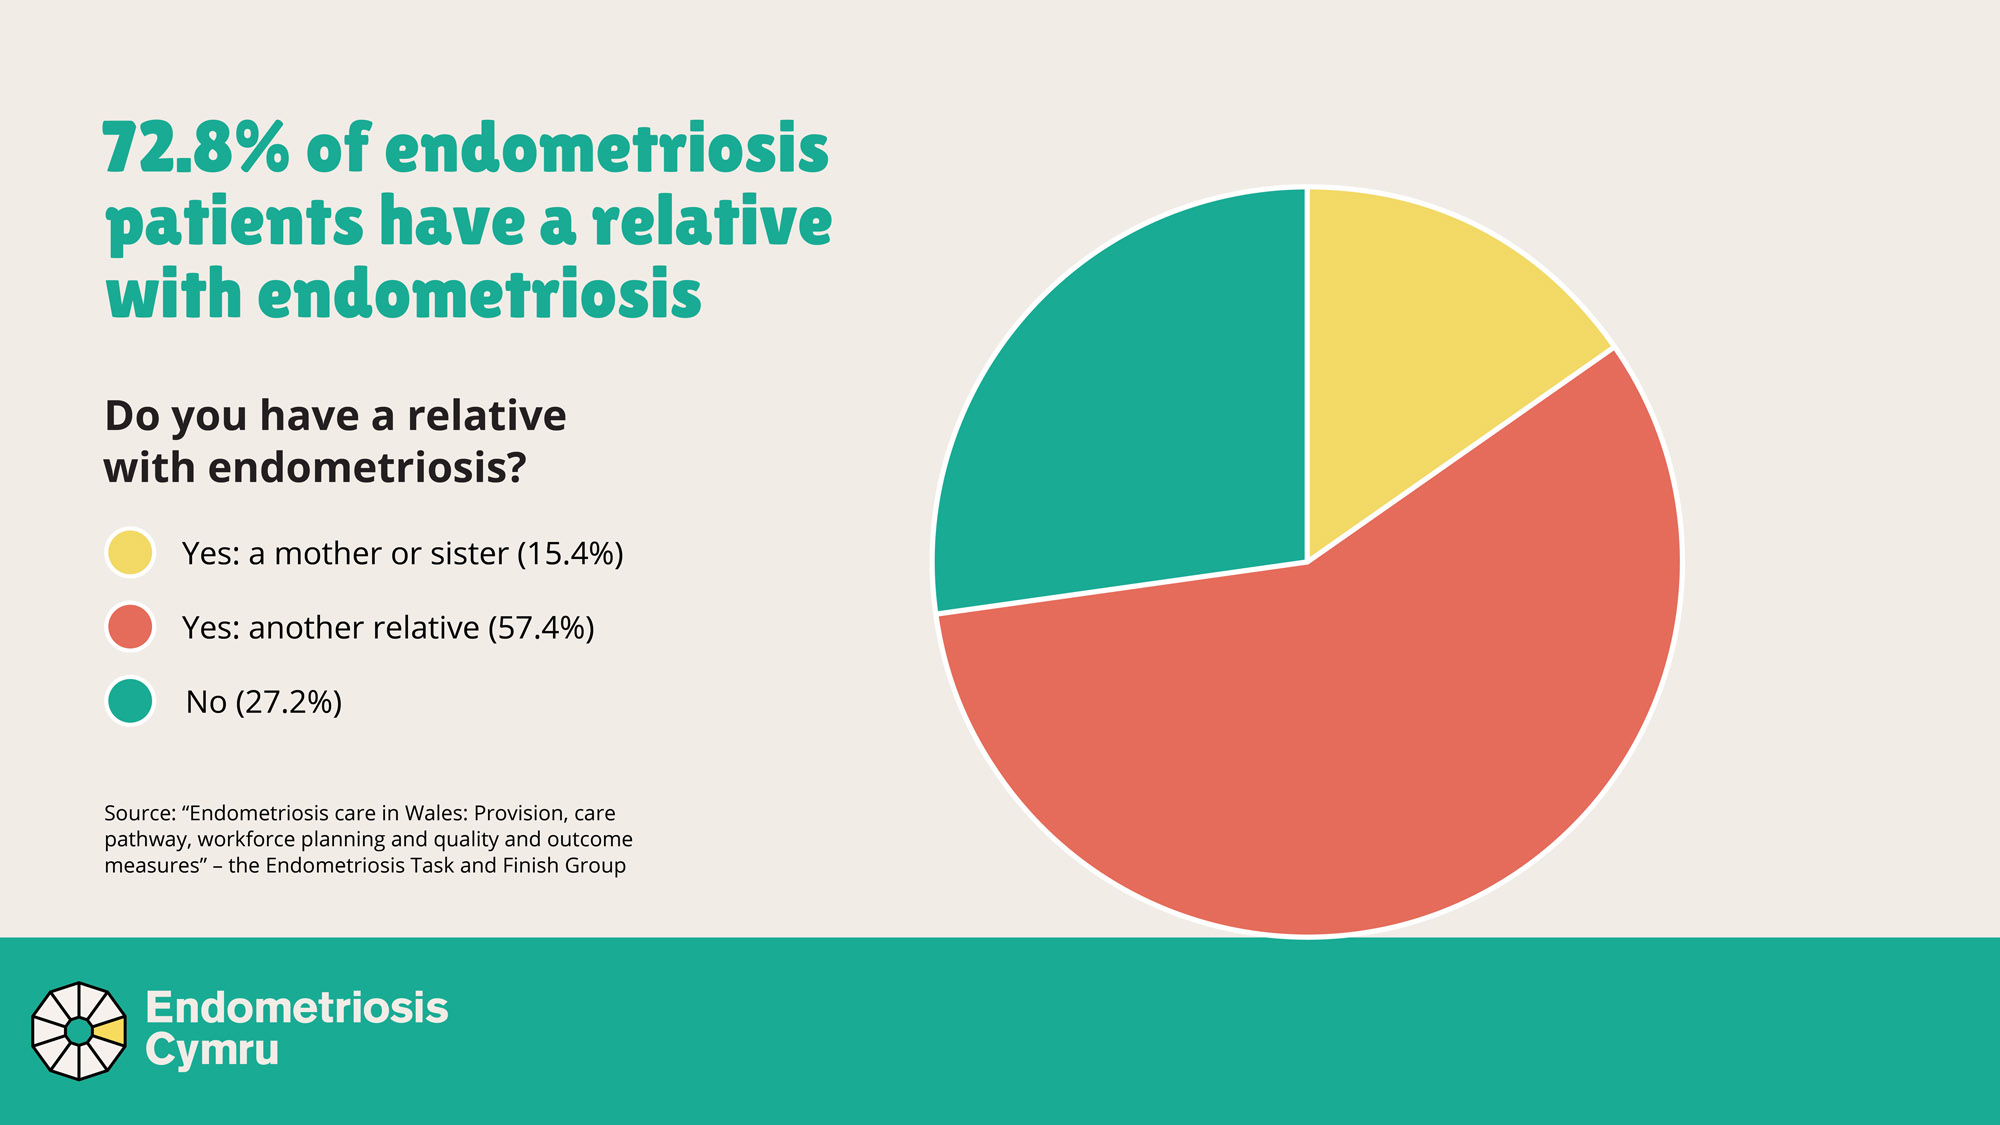 A pie chart showing that 72.8% of endometriosis patients have a relative with endometriosis